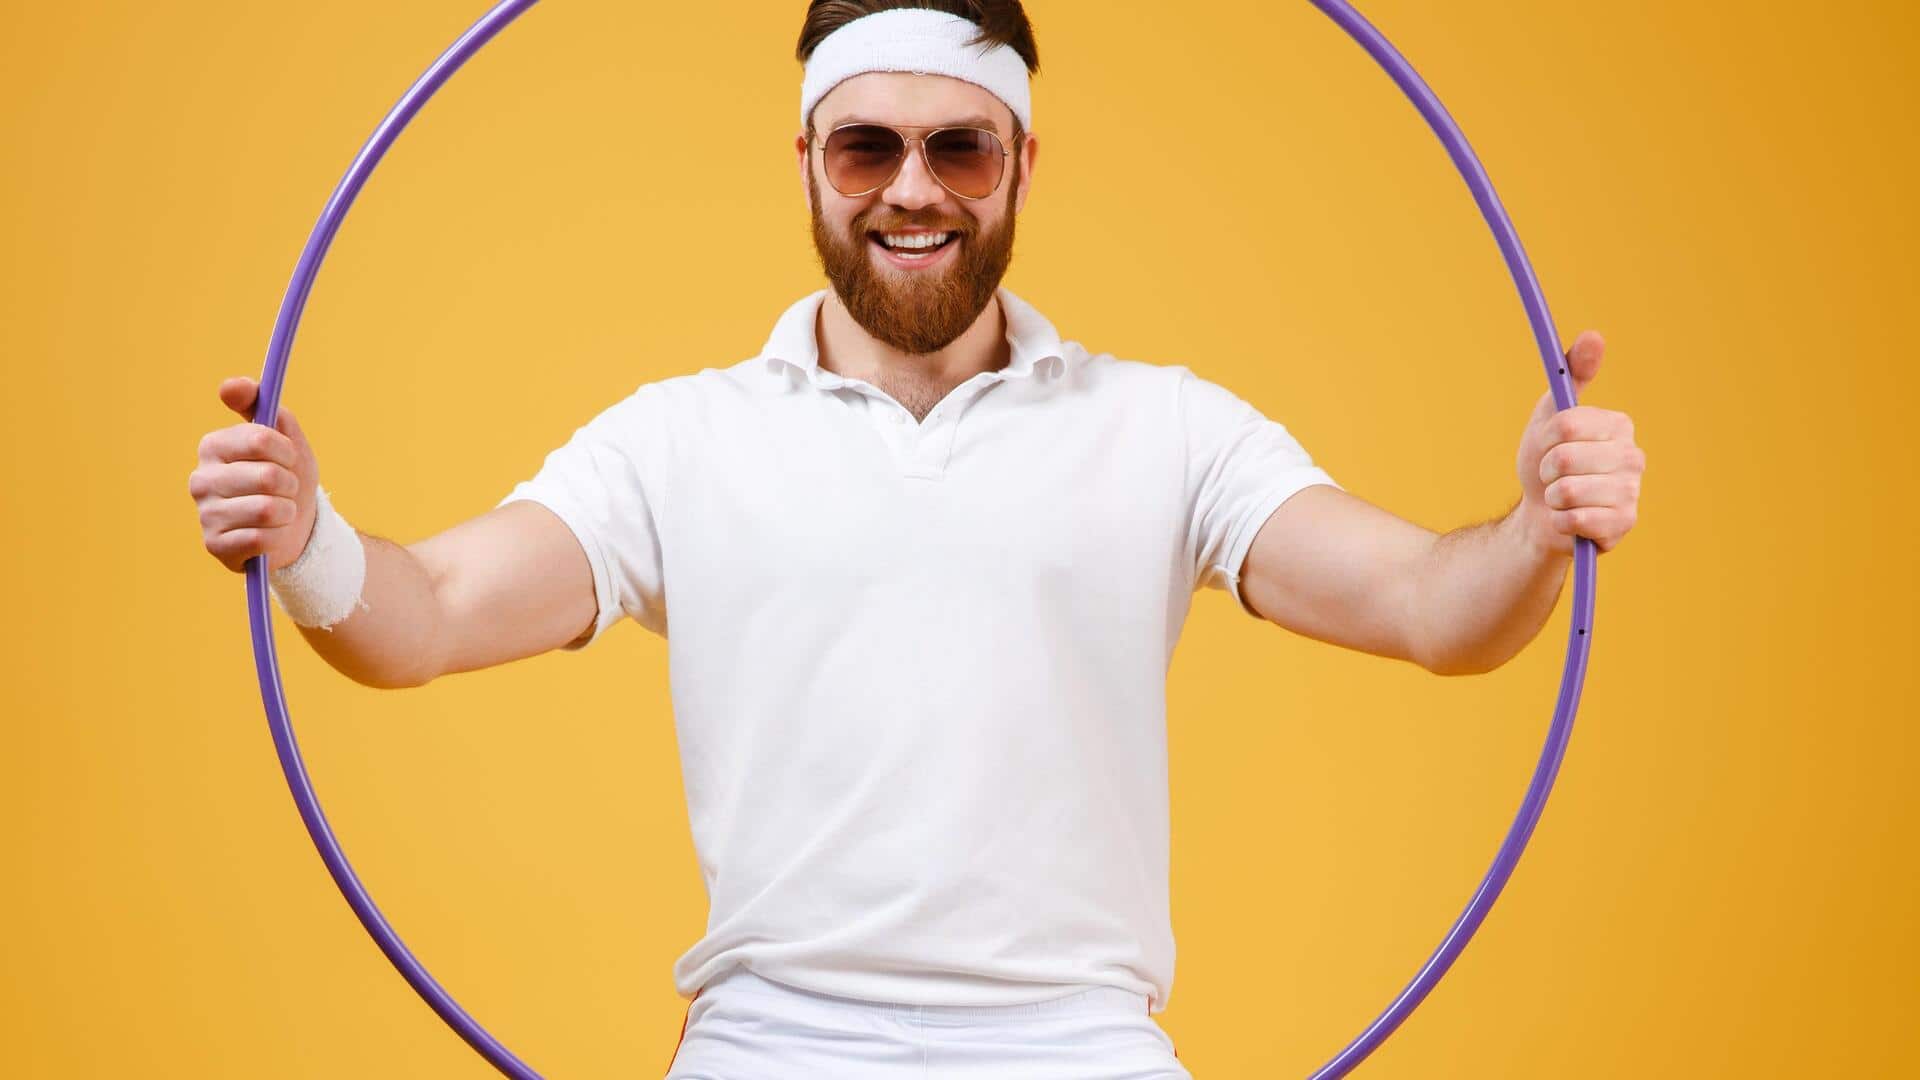 Make your workouts more fun with these hula hoop exercises